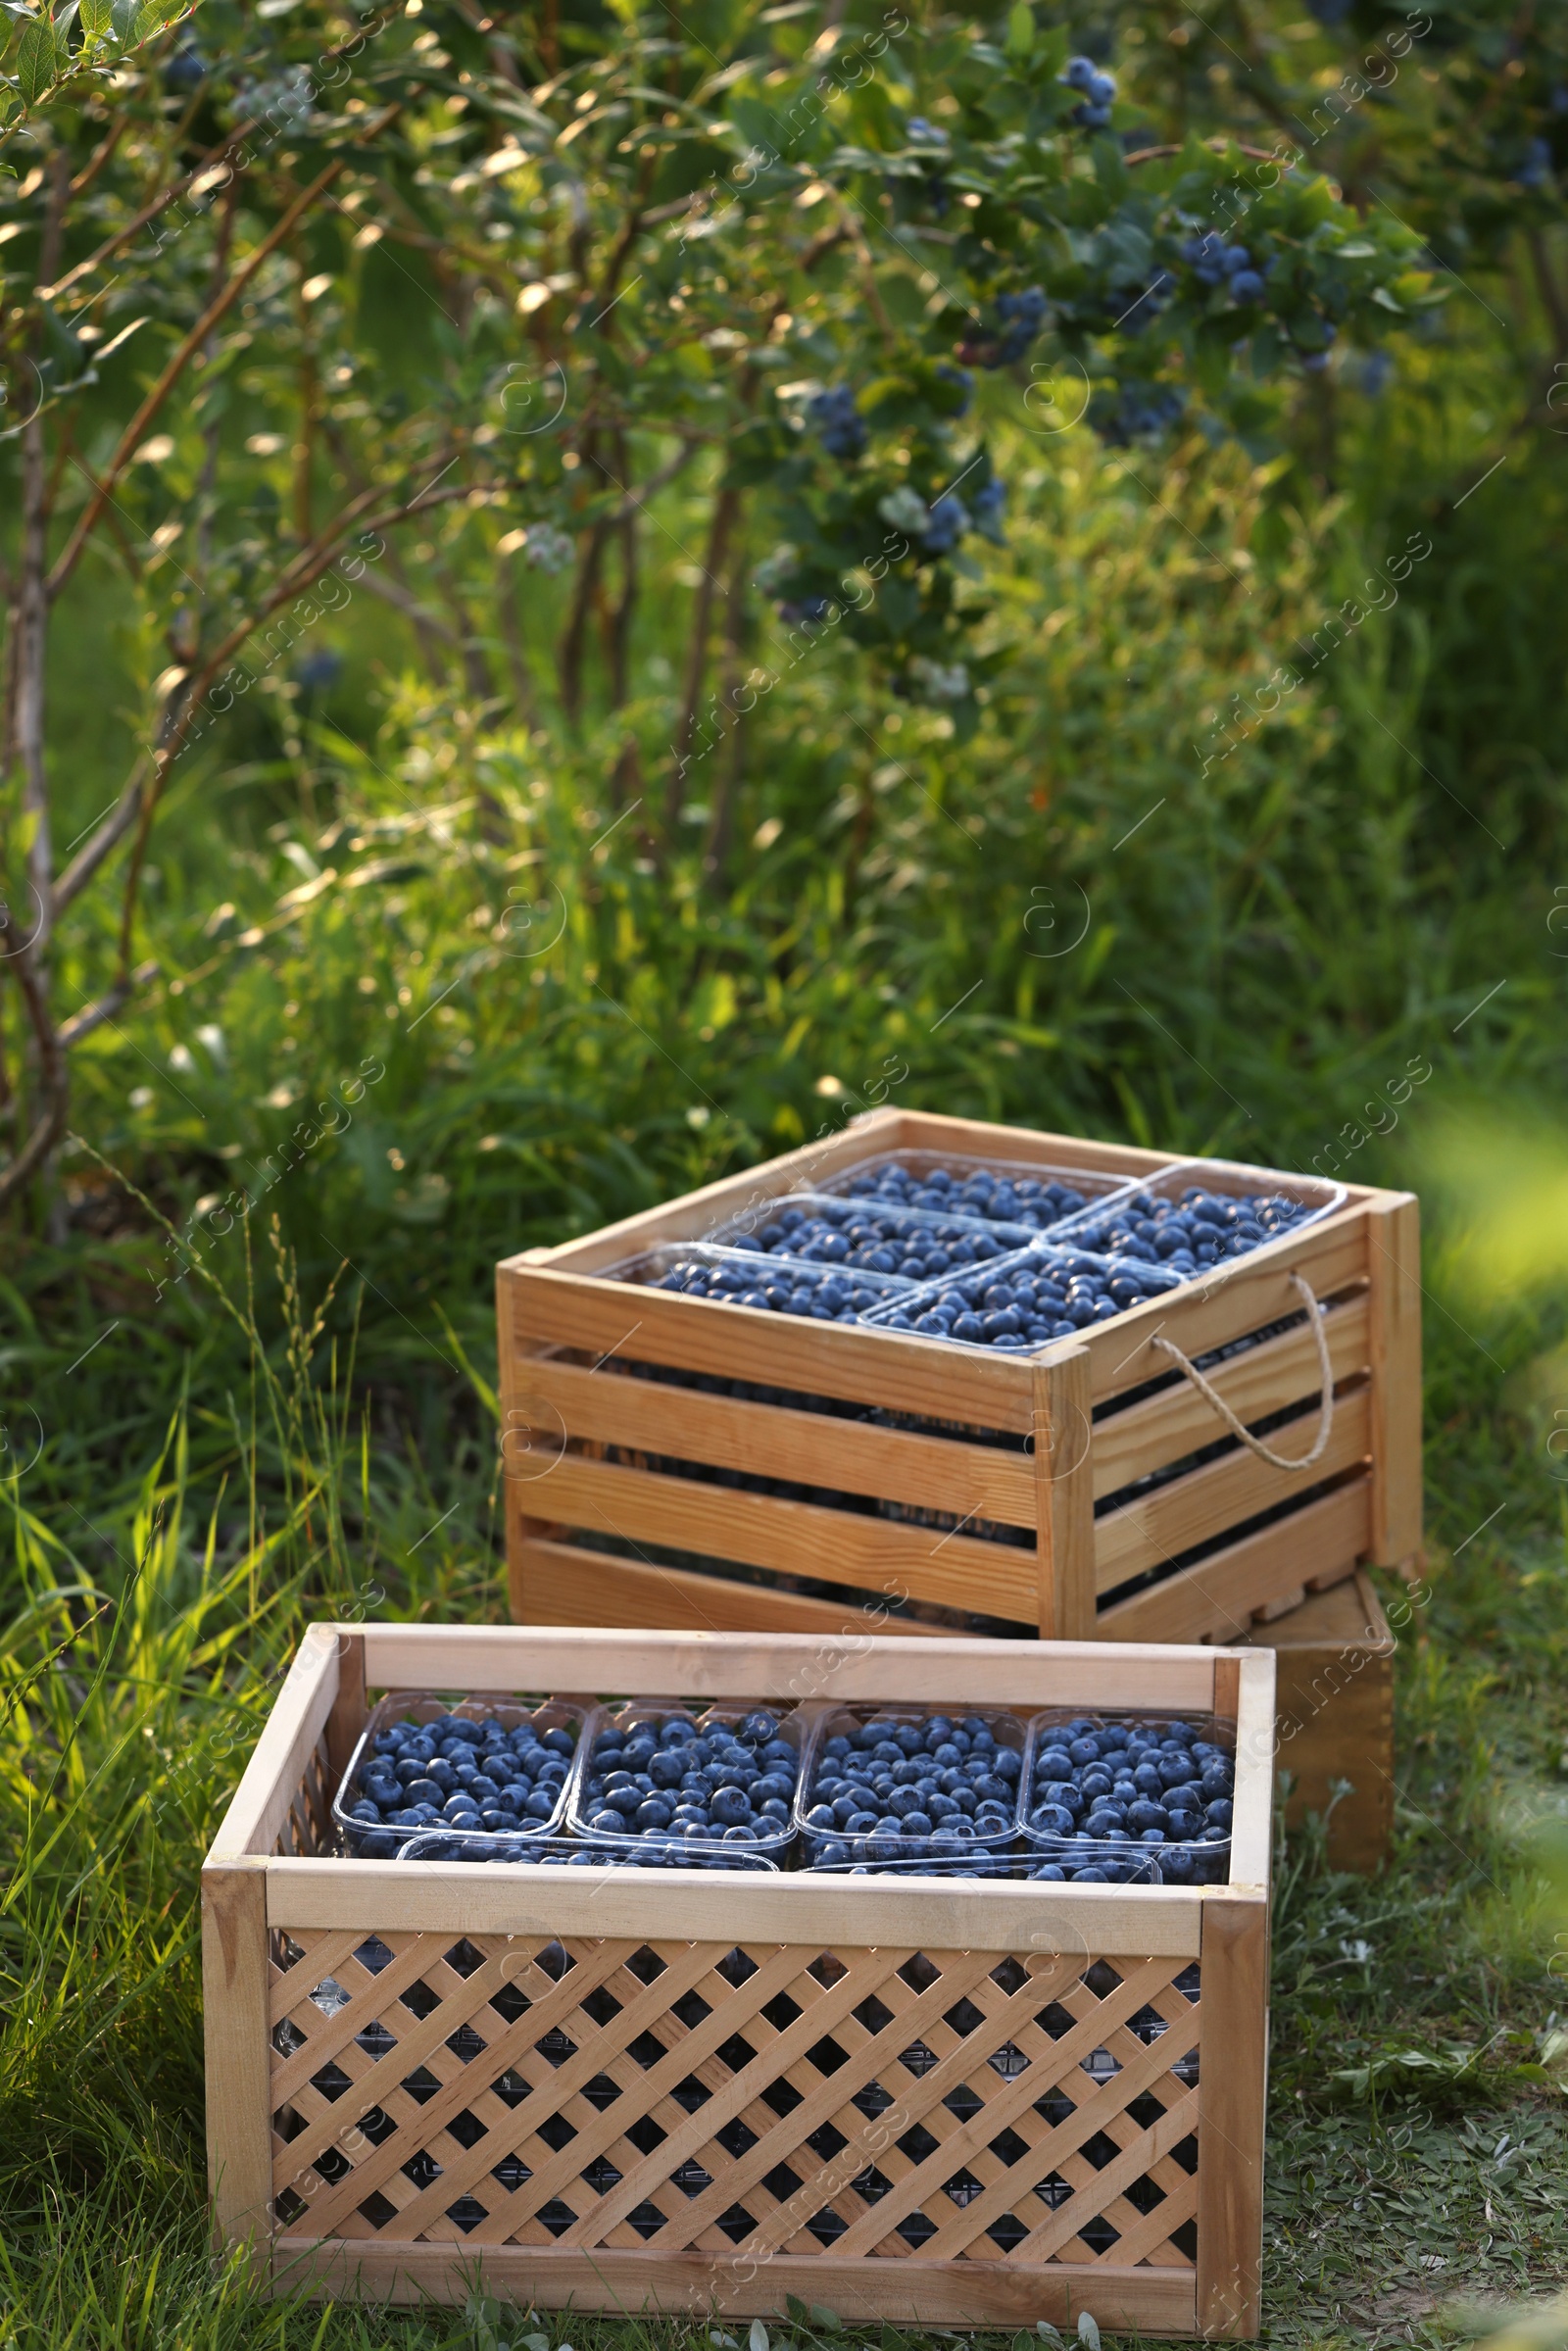 Photo of Boxes of fresh blueberries on green grass outdoors. Seasonal berries